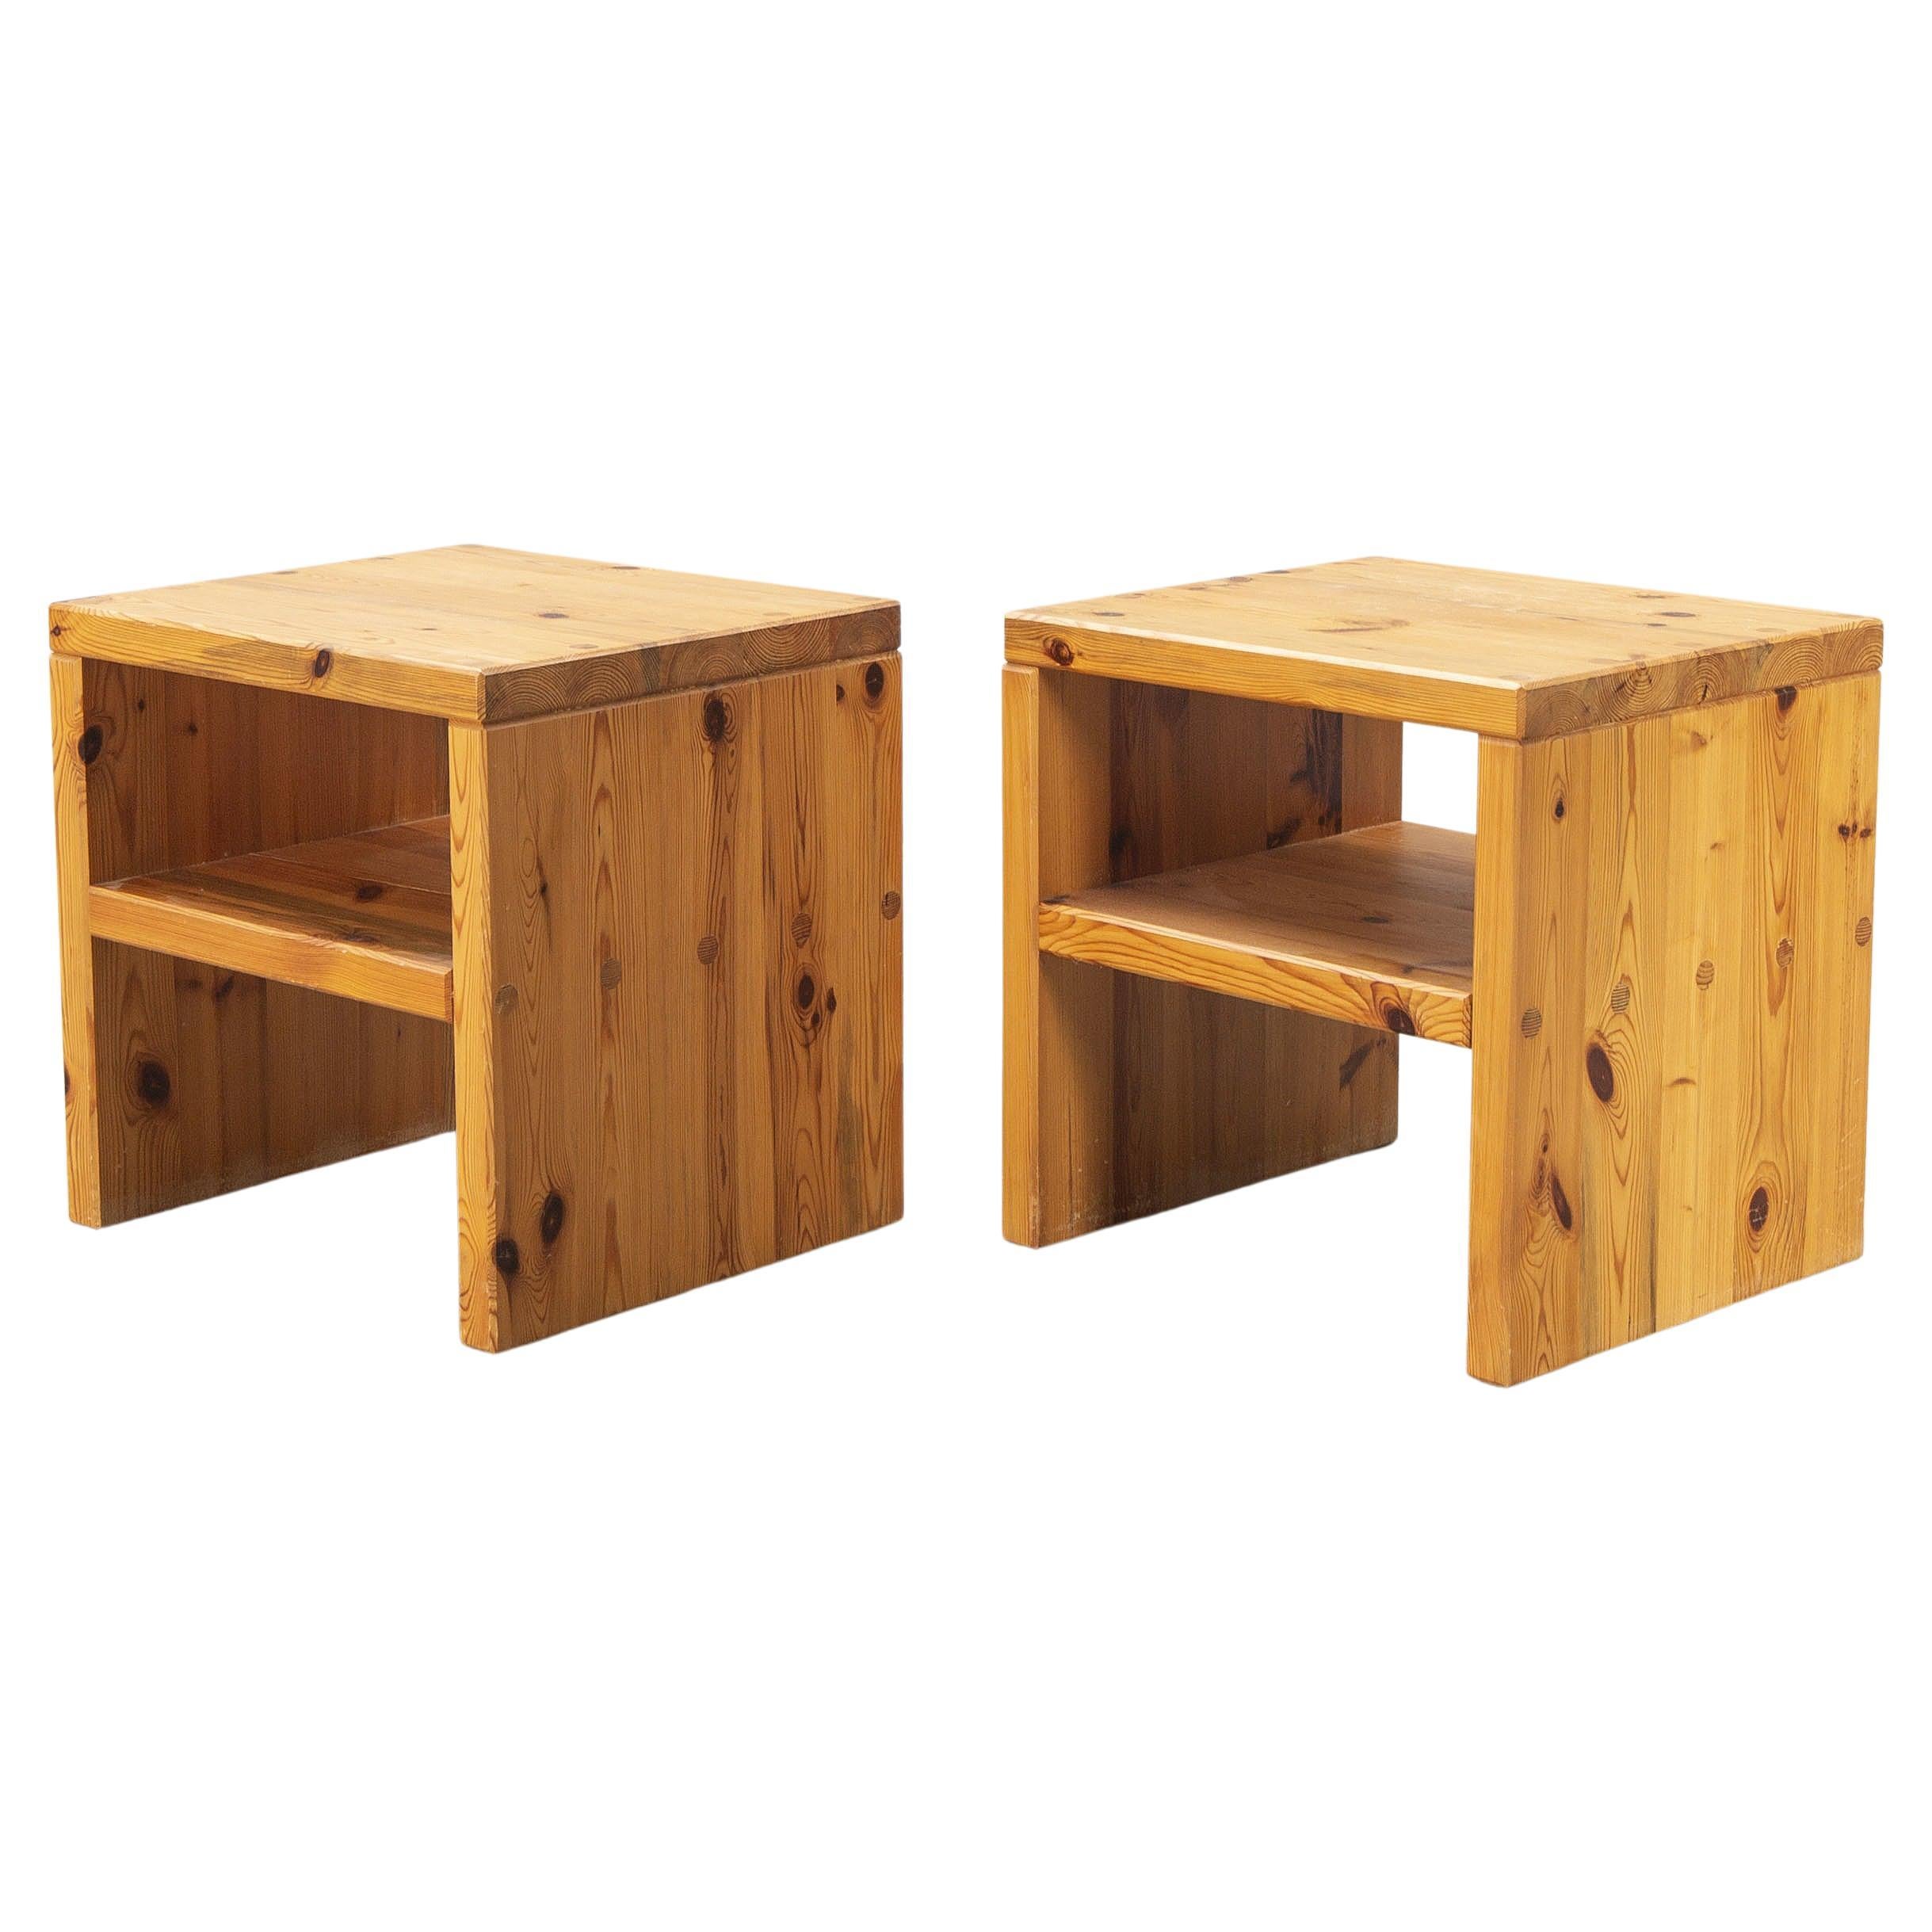 Pair of side tables / bedside tables designed by Swedish designer Sven Larsson. Distinctive for his work is the use of solid pine wood and the refined joinery that shows his true craftsmanship. 
Sven Larsson is one of the Swedish pioneers of the